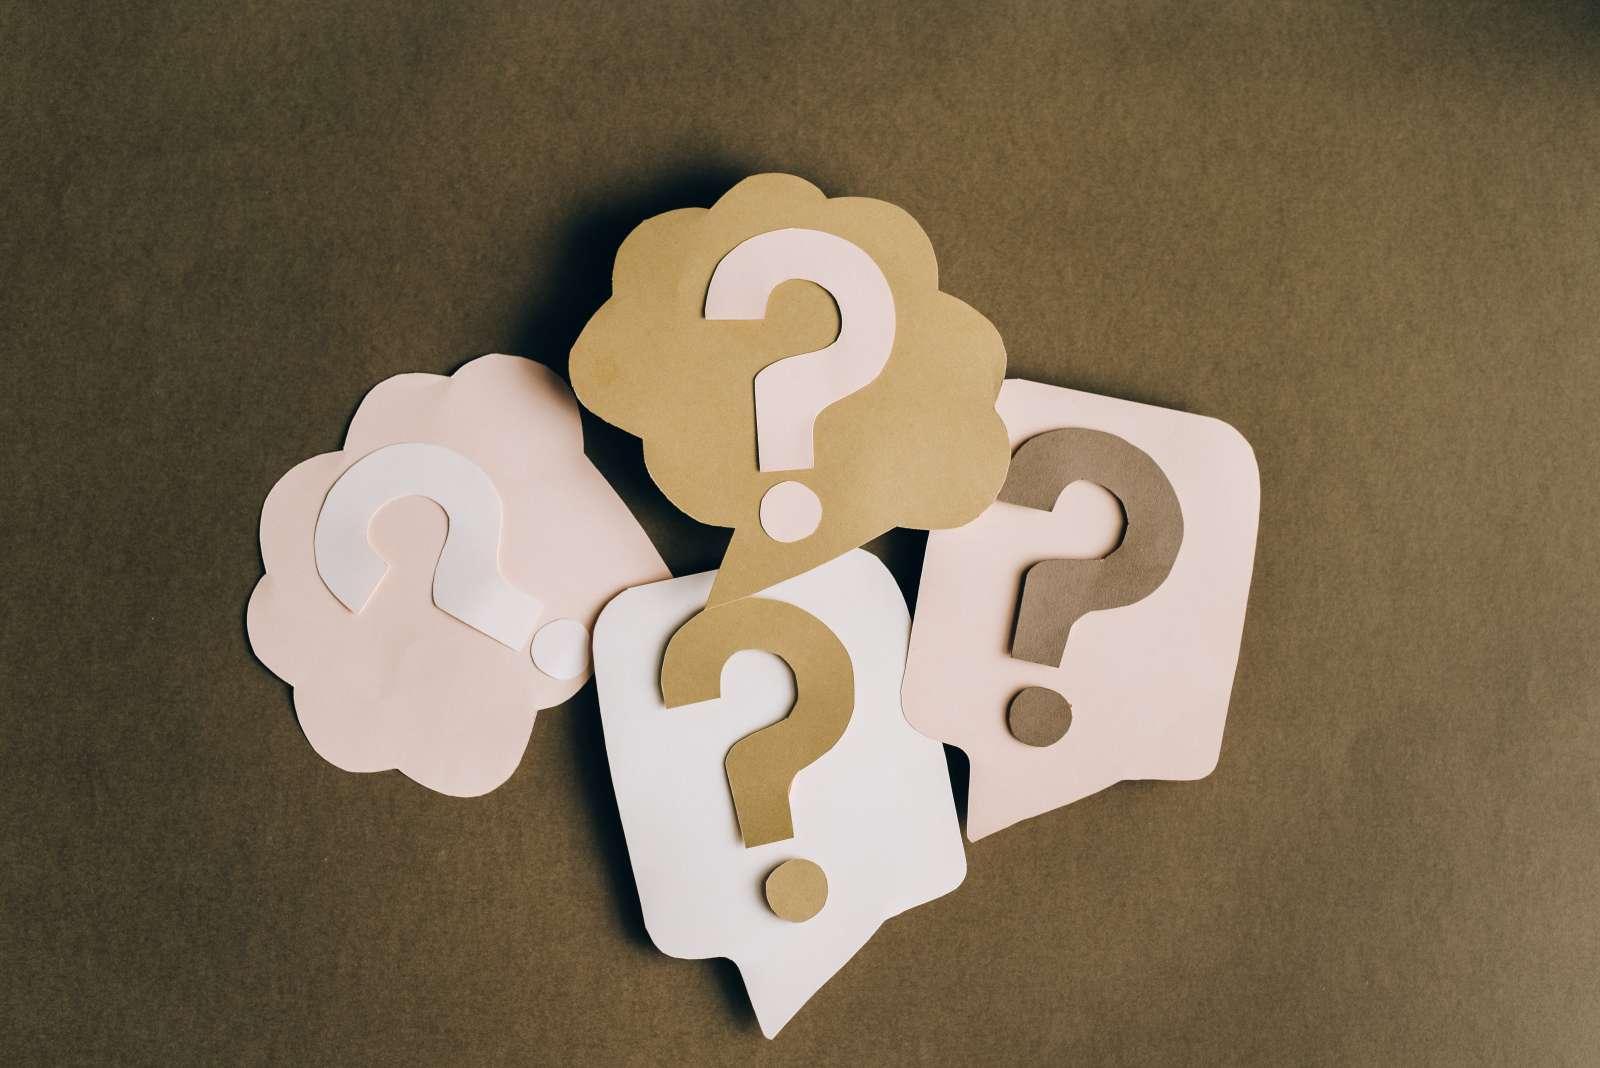 A picture of four question mark cutouts on paper